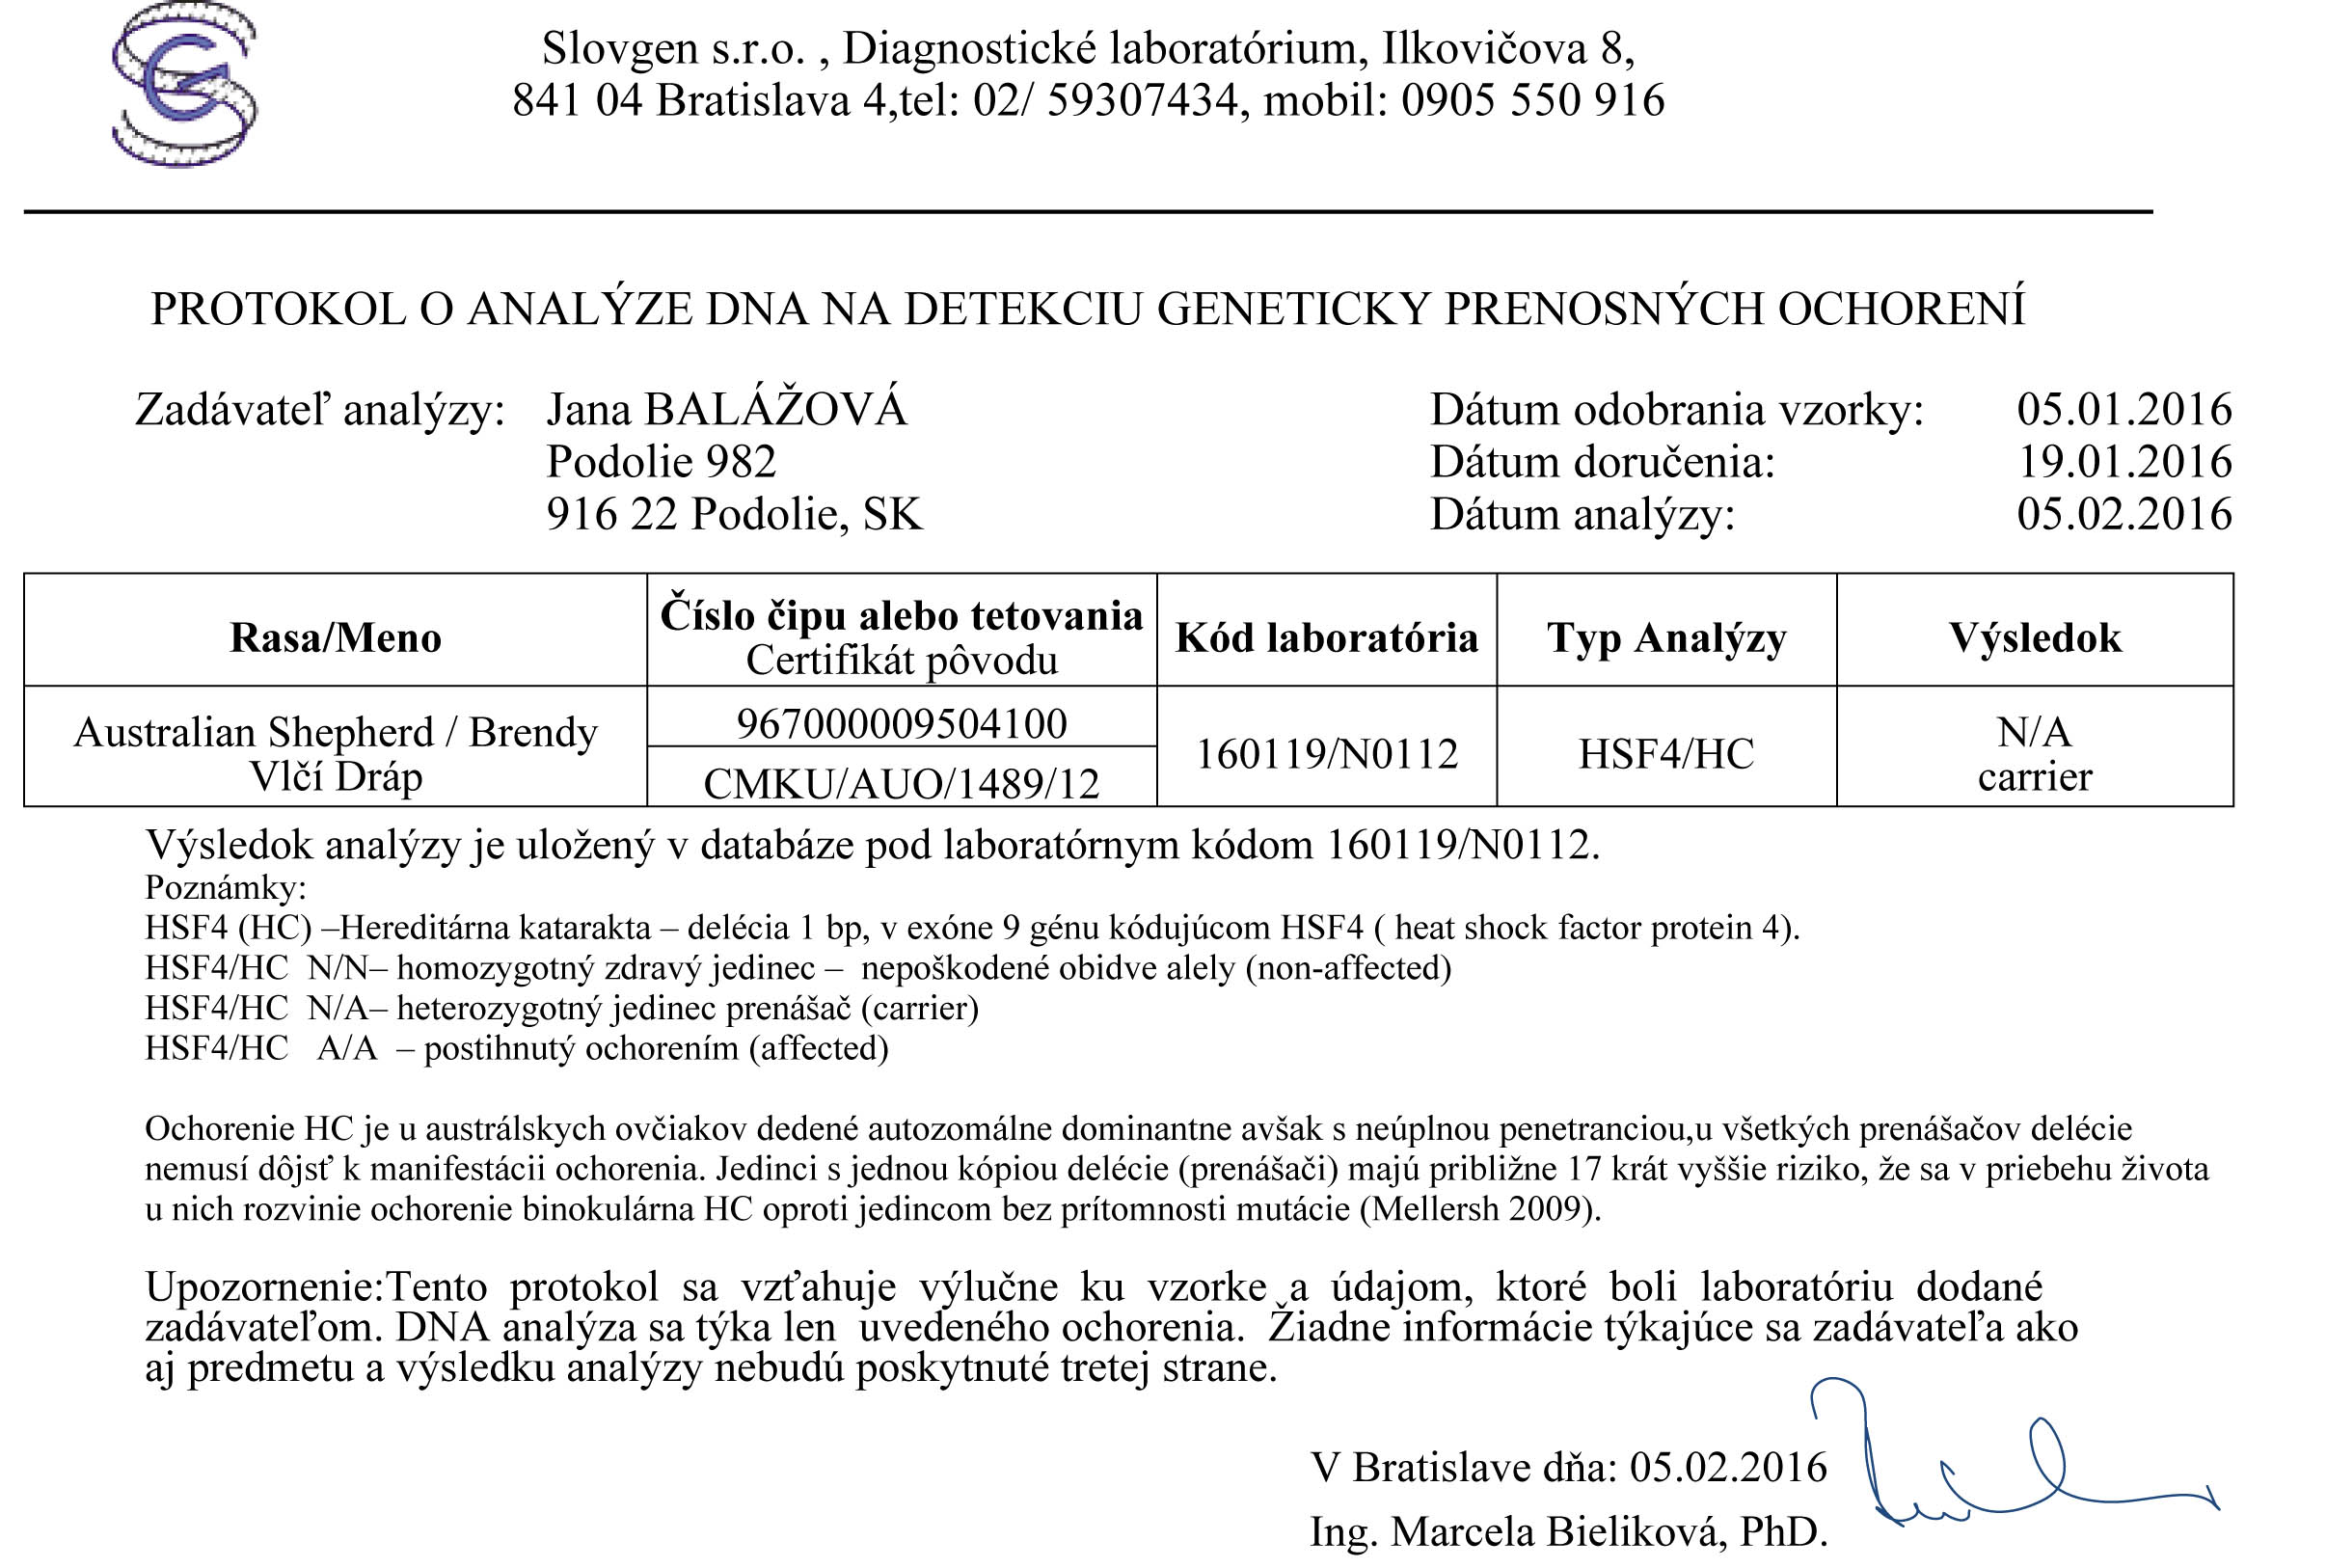 Results of DNA test for HSF4